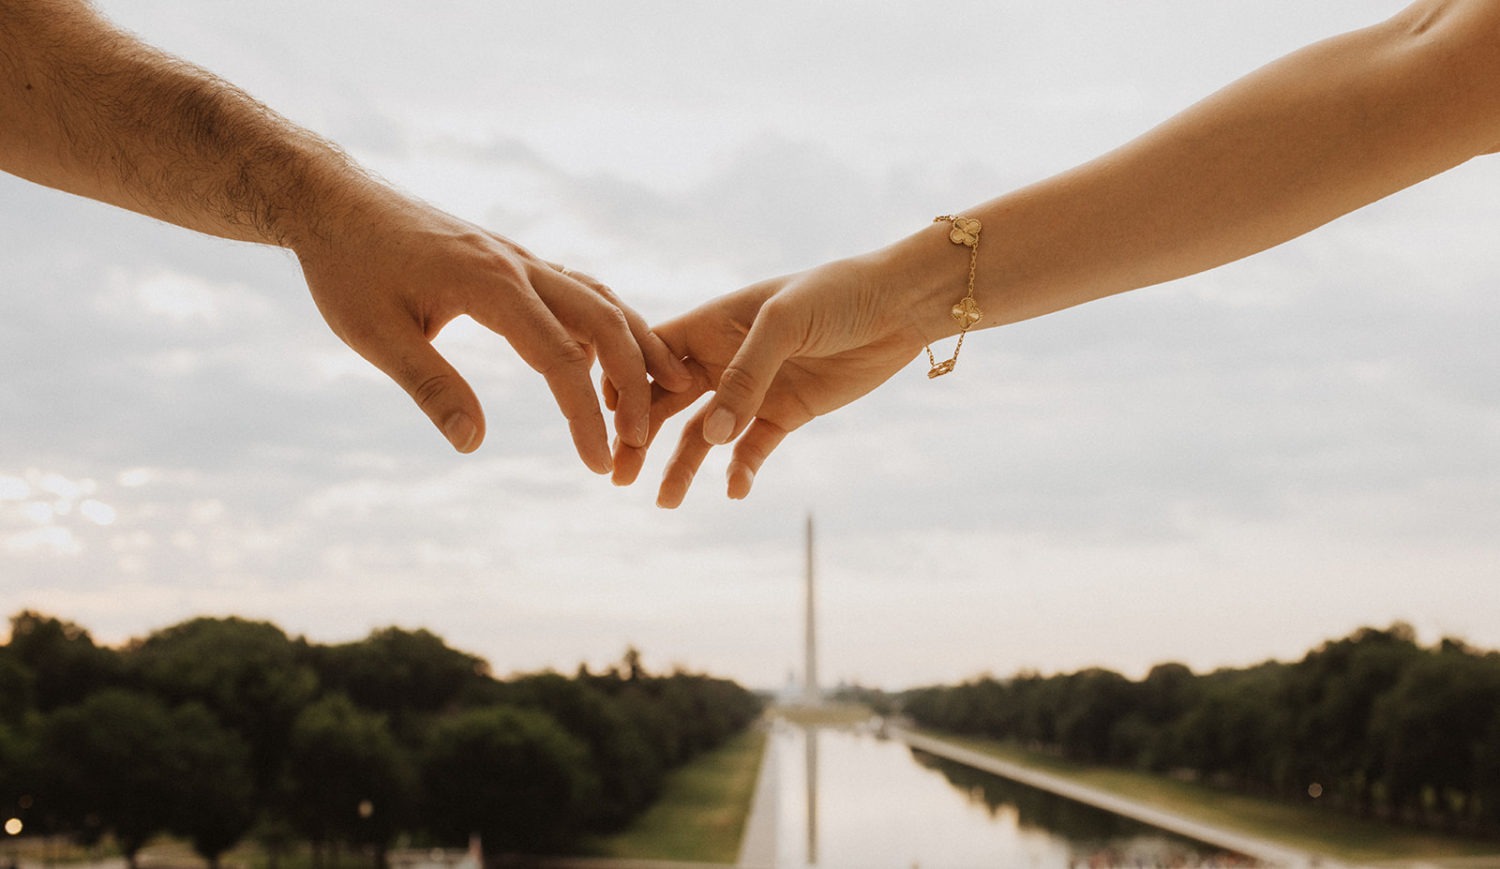 DC engagement photographer captures couple holding hands in front of Washington Monument and Reflecting Pool